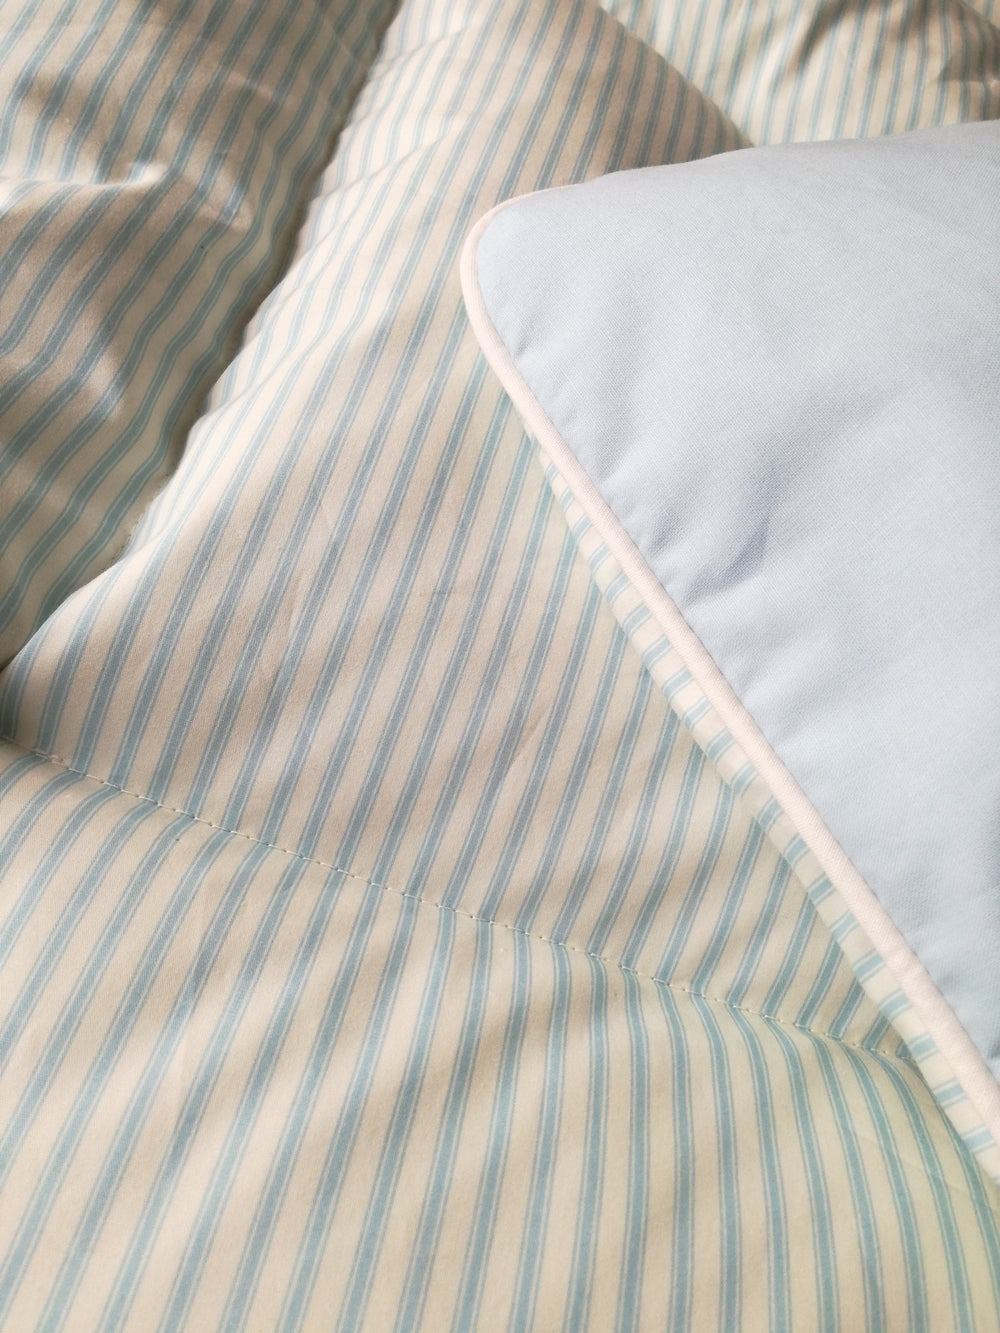 Striped Ticking Eiderdown - Available in 4 colours